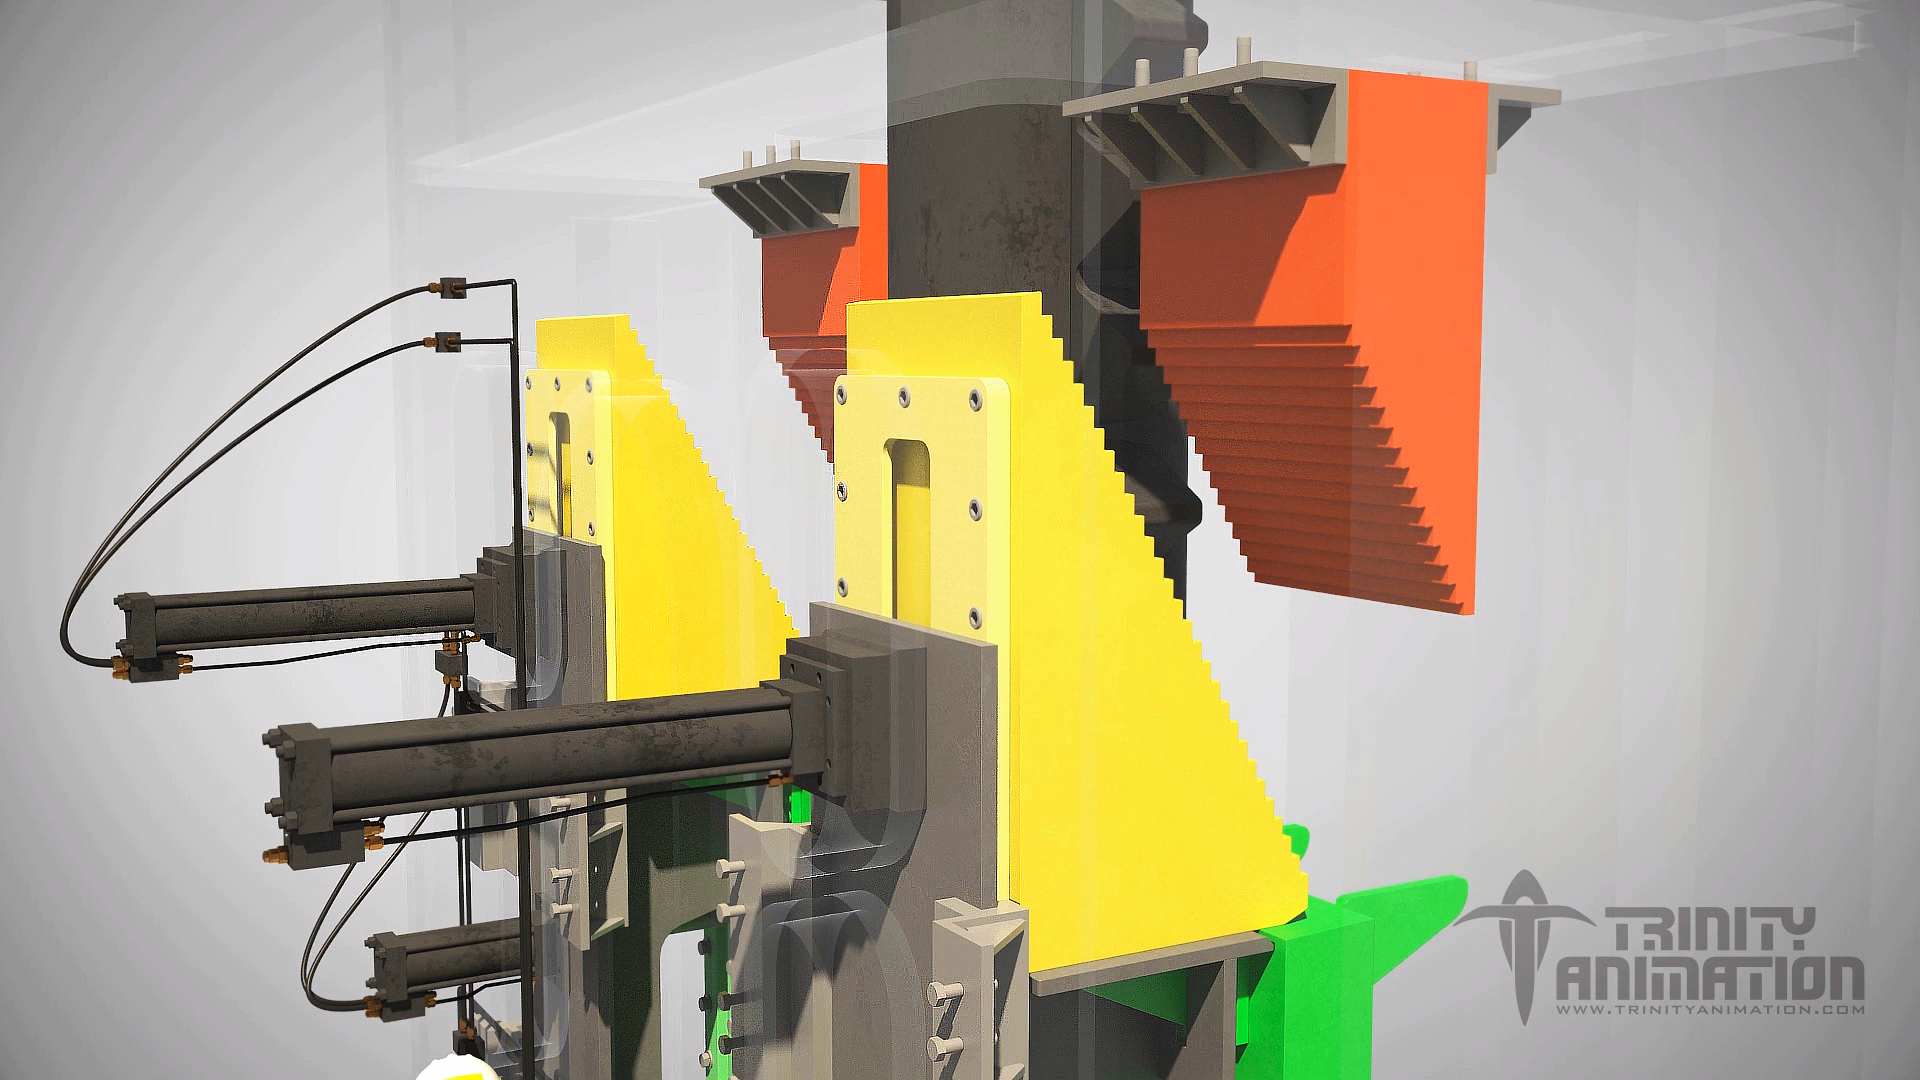 This is a 3D rendered image from Trinity's oil exploration animation - demonstrating how the Zentech Zenlock apparatus works. This image displaysAll four wedges have serrated surfaces allowing differential penetration by each of the three jackup legs through mechanical adjustments.